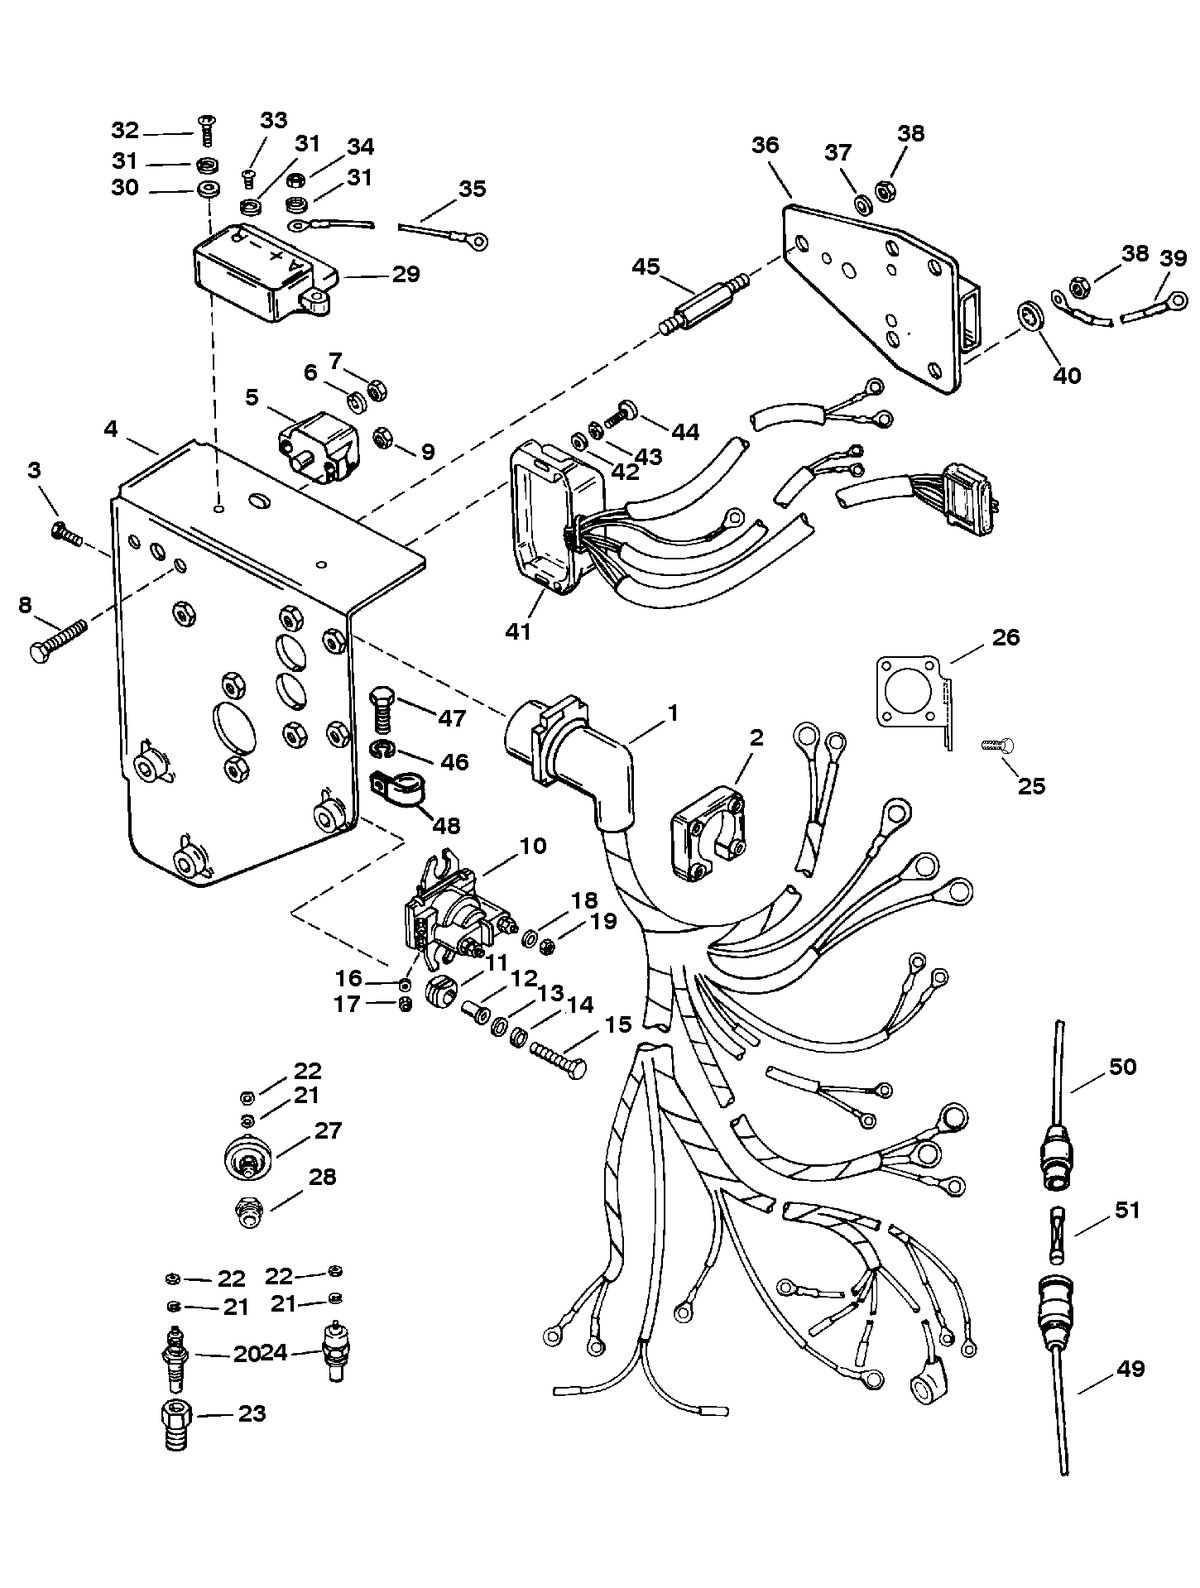 RACE STERNDRIVE 500 H.P. 8.2L (502 CI) ENGINE WIRING HARNESS AND ELECTRICAL COMPONENTS